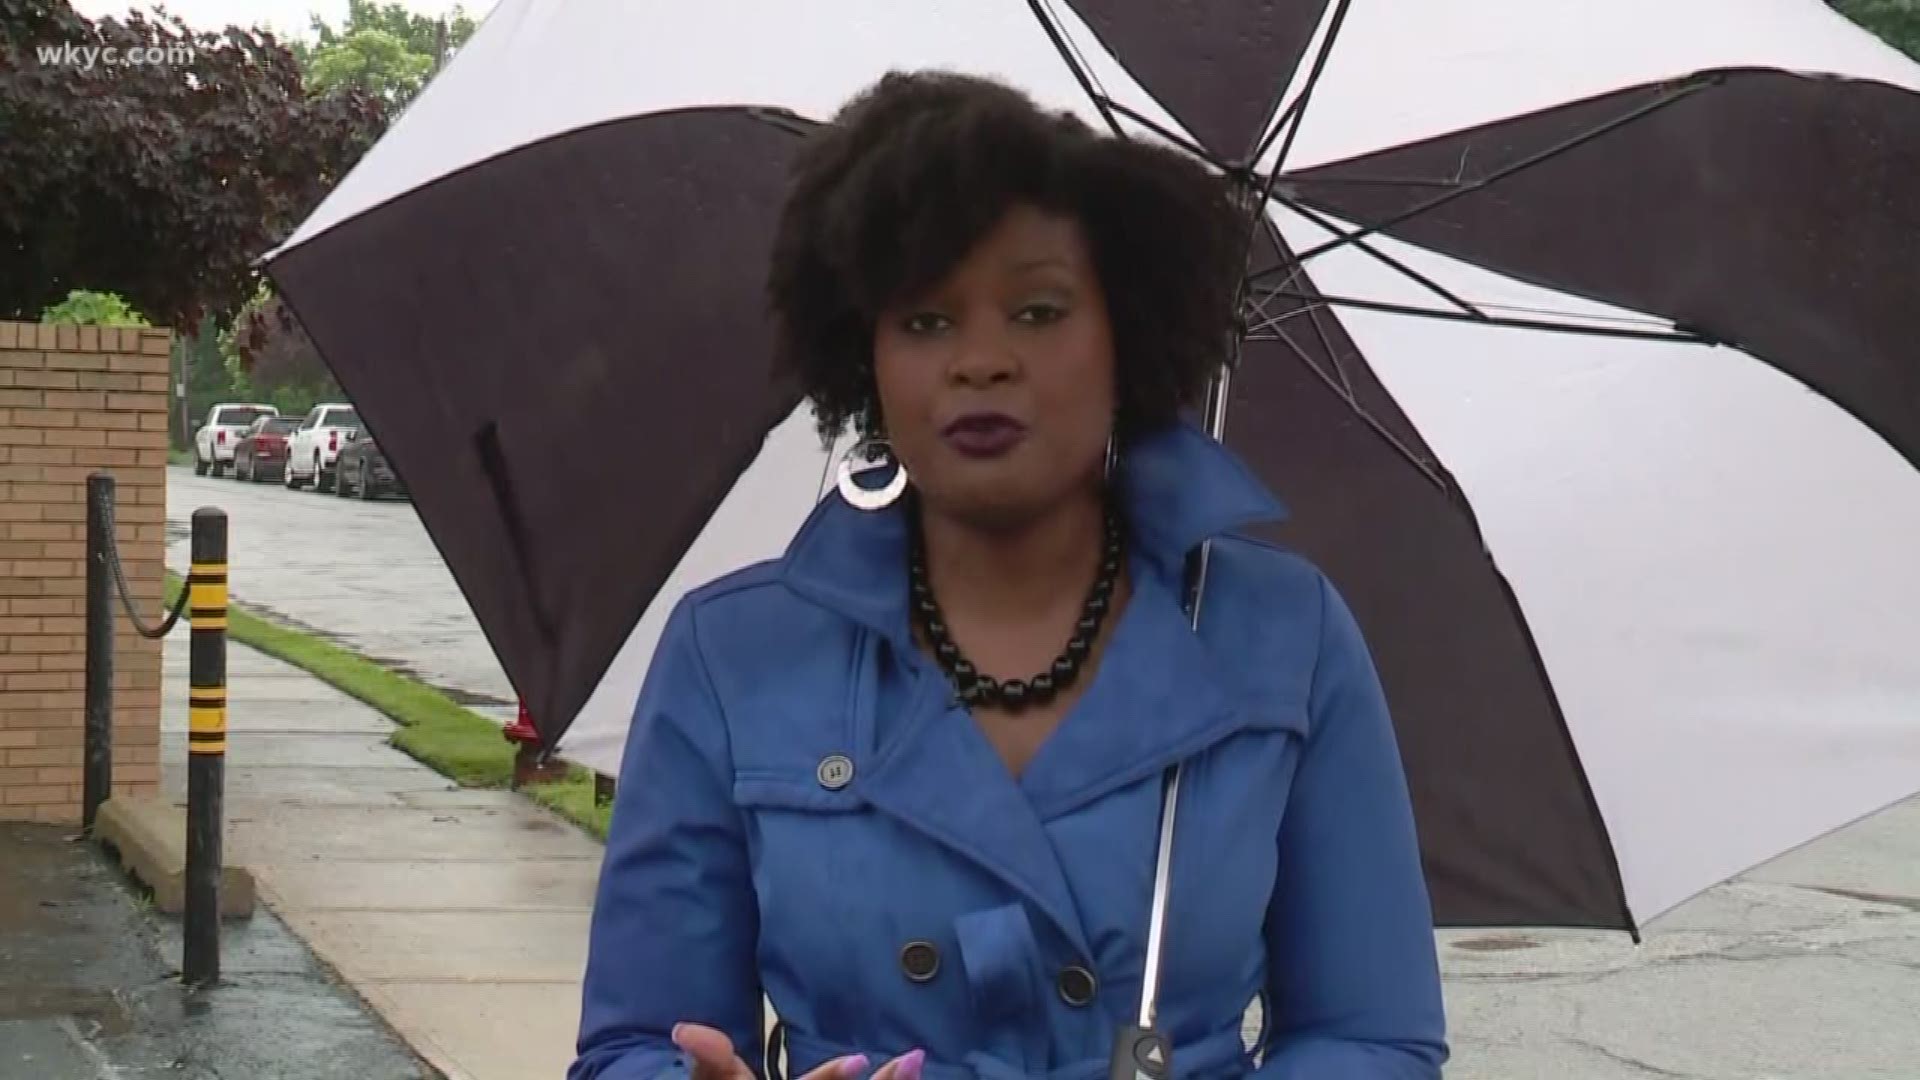 WKYC's Tiffany Tarpley reports from Lakewood, where several roads have closed due to standing water.